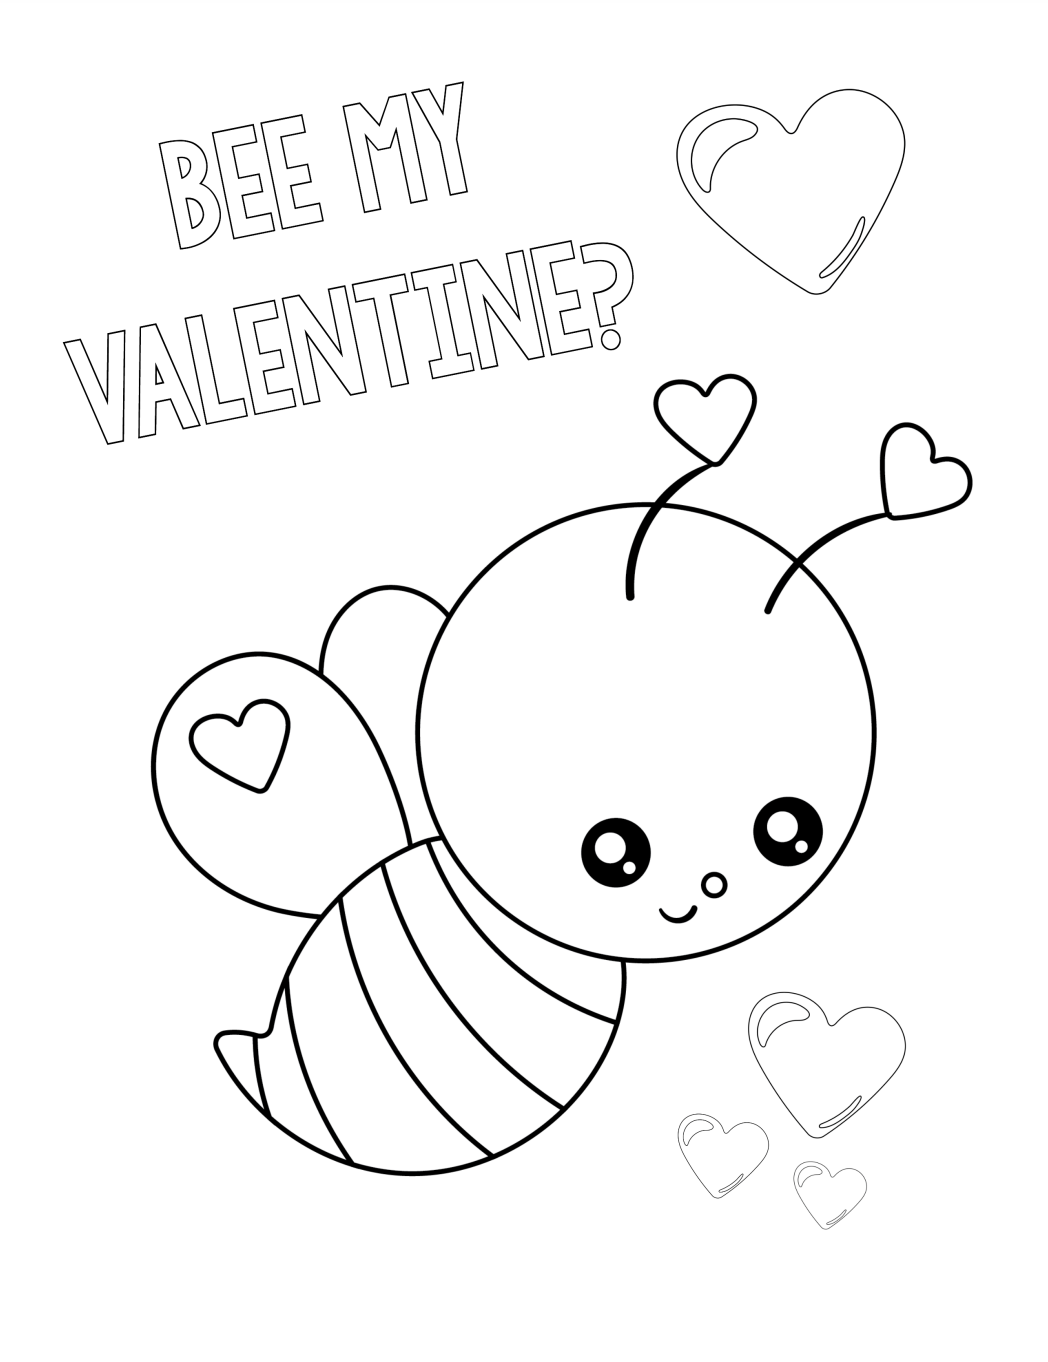 Cute Valentine s Day Coloring Pages For Kids Crazy Little Projects